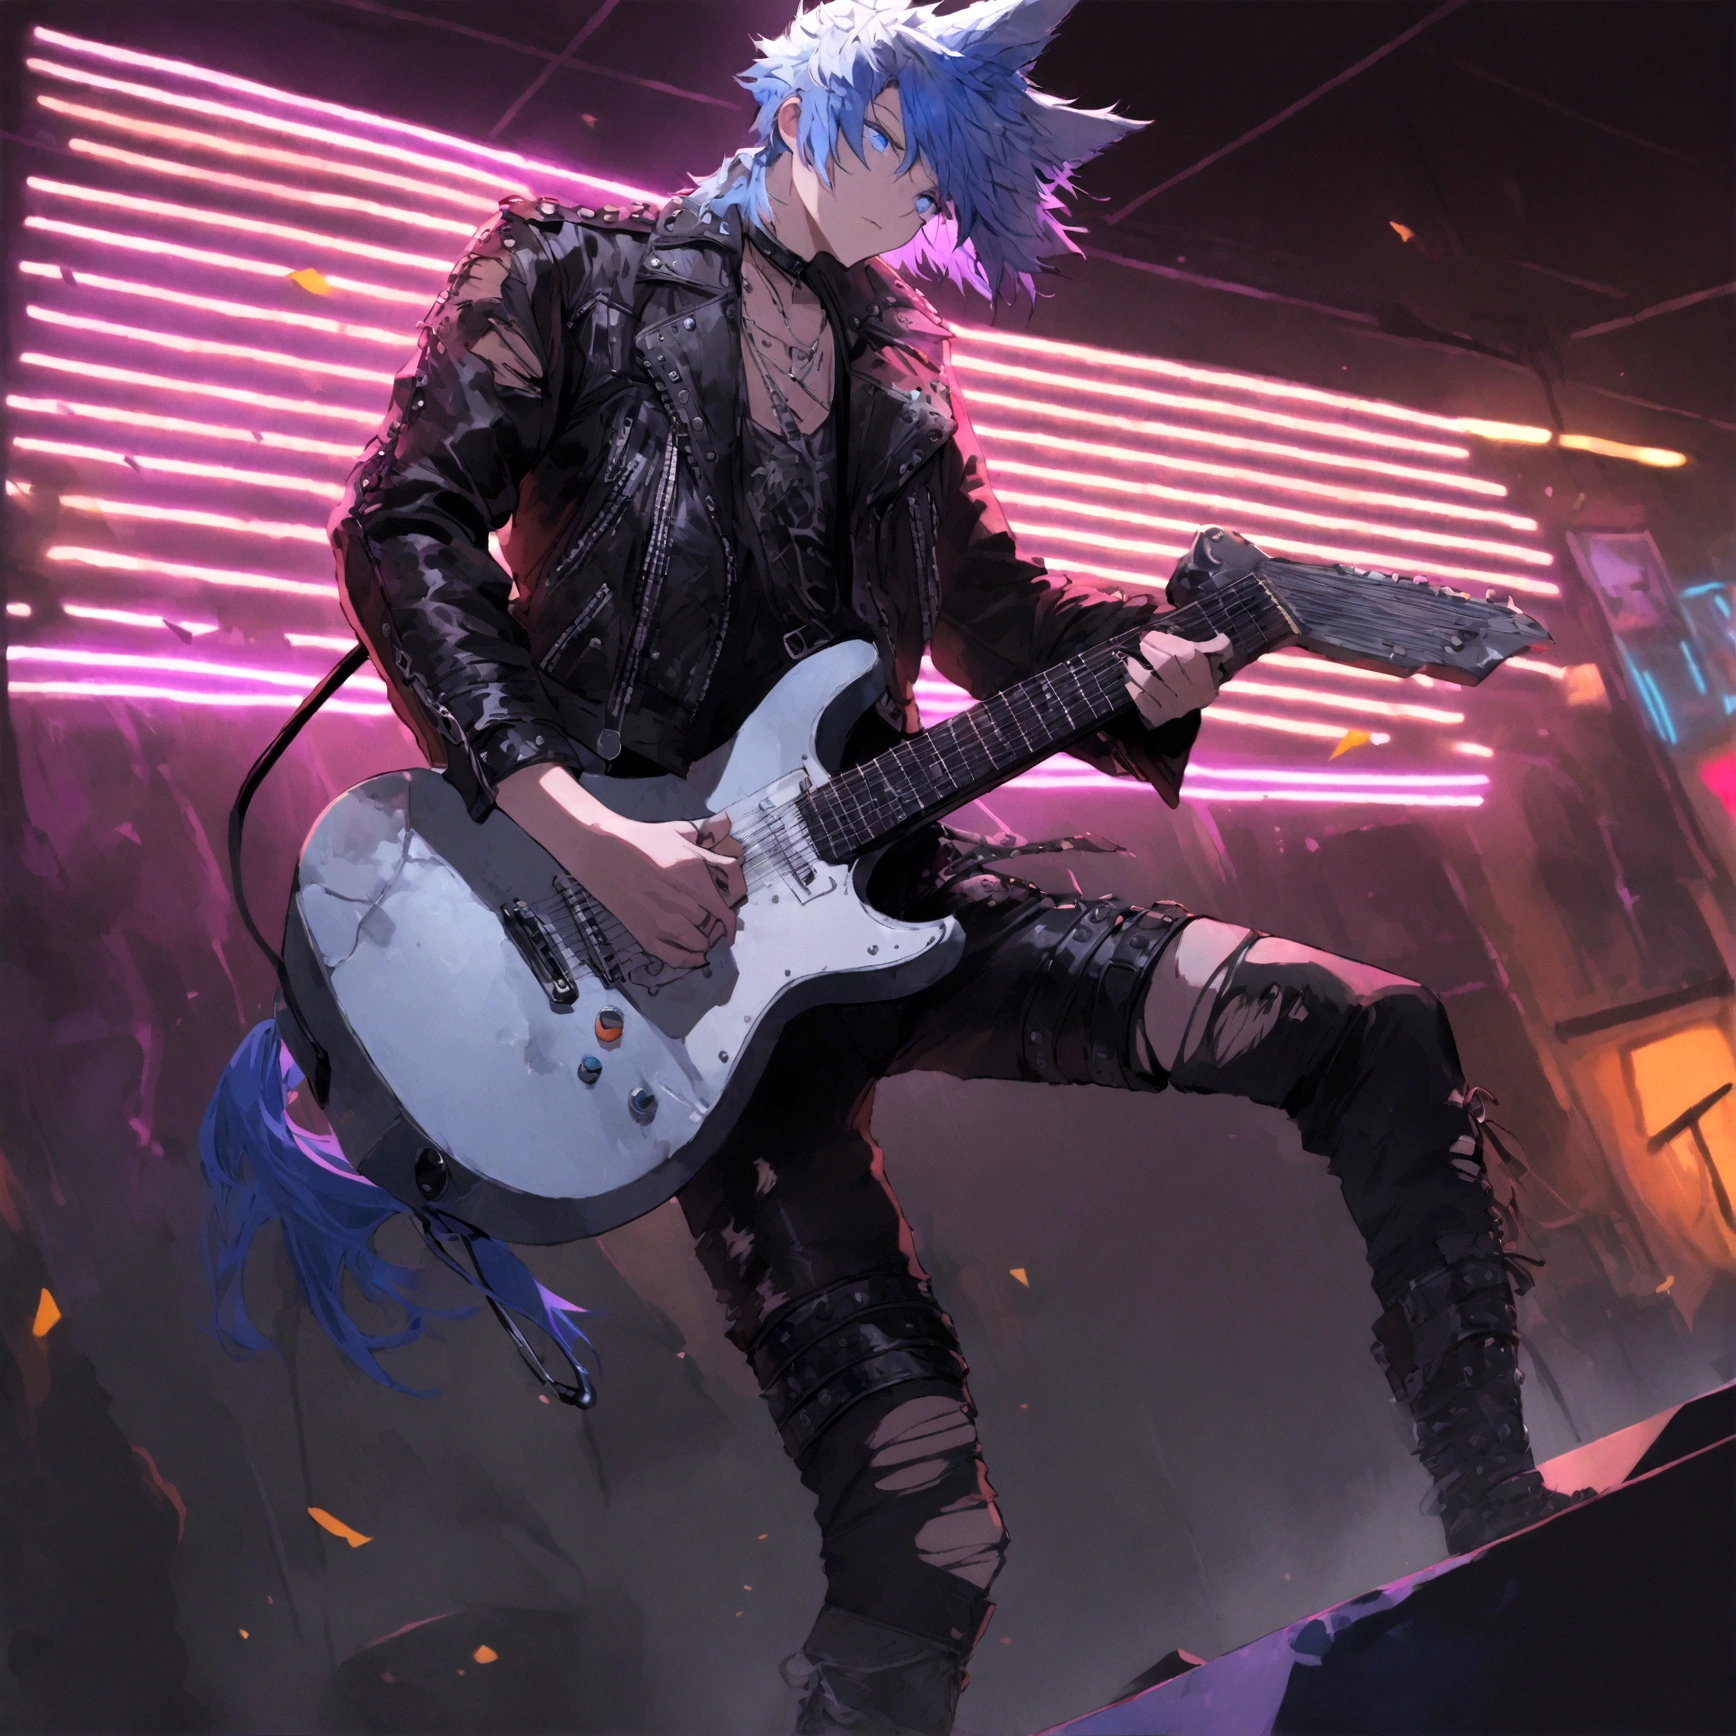 a white wolf with blue eyes wearing a punk outfit playing the lead guitar in a band, has blue mowhawk, has leather patched jacket, wearing torn boots, shredding on guitar, many multi colored neon lights